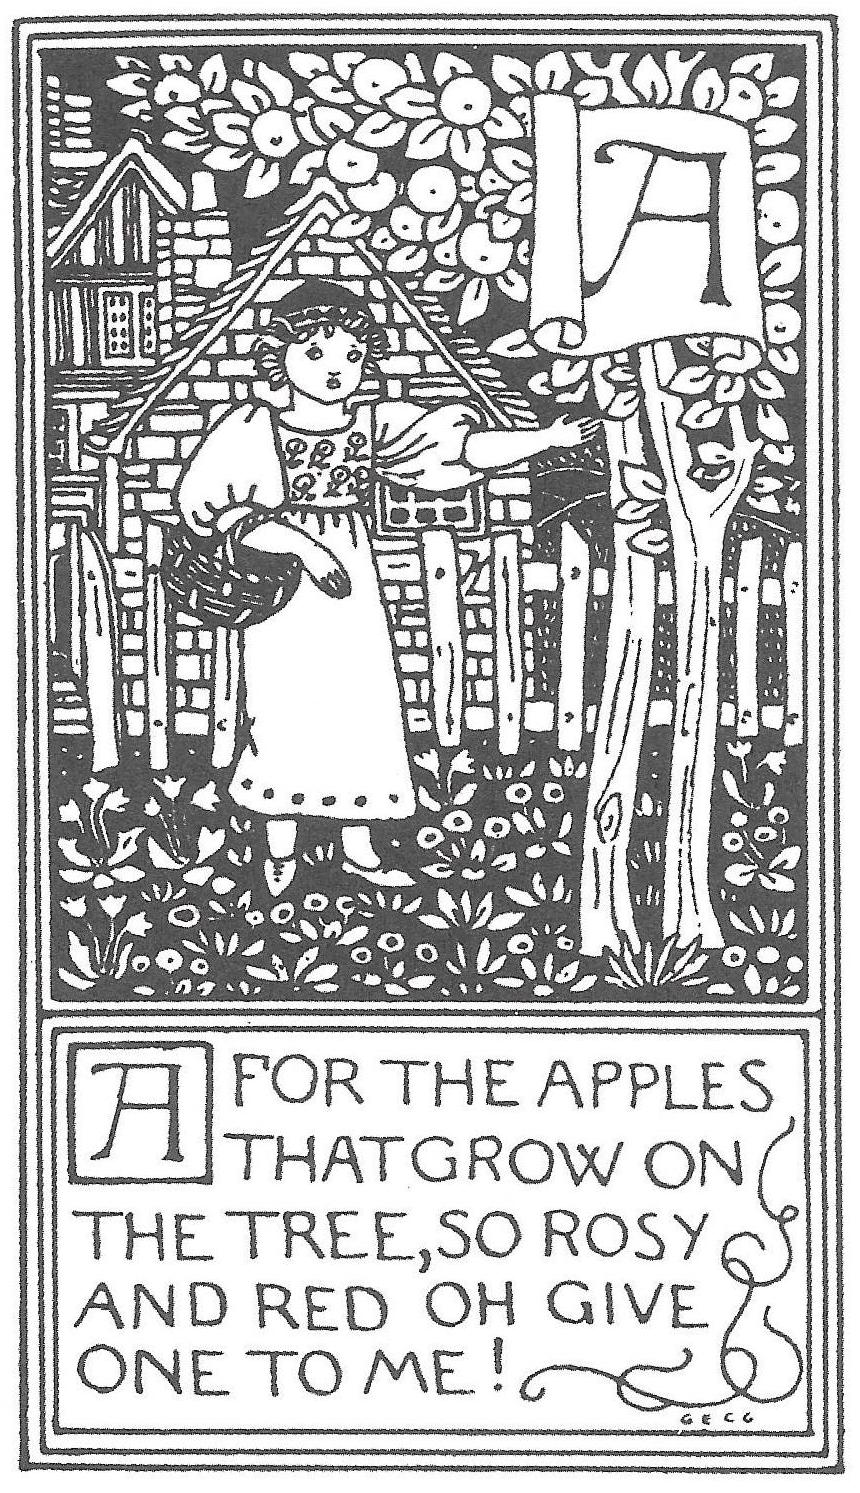 A for the Apples